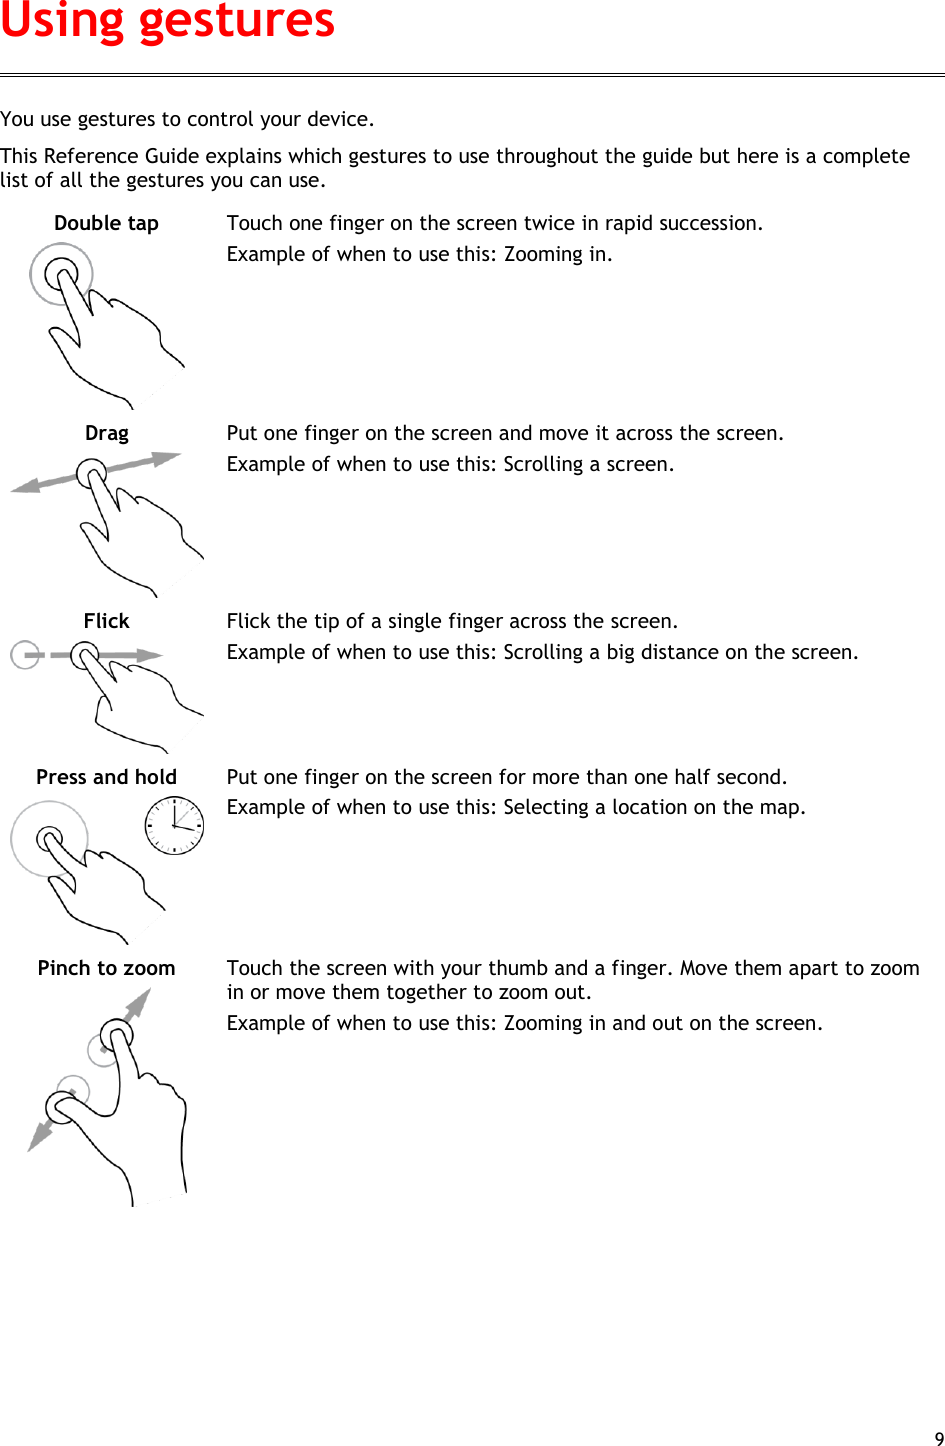  9  You use gestures to control your device.   This Reference Guide explains which gestures to use throughout the guide but here is a complete list of all the gestures you can use. Double tap   Touch one finger on the screen twice in rapid succession. Example of when to use this: Zooming in.  Drag   Put one finger on the screen and move it across the screen. Example of when to use this: Scrolling a screen. Flick   Flick the tip of a single finger across the screen. Example of when to use this: Scrolling a big distance on the screen. Press and hold   Put one finger on the screen for more than one half second. Example of when to use this: Selecting a location on the map.   Pinch to zoom   Touch the screen with your thumb and a finger. Move them apart to zoom in or move them together to zoom out. Example of when to use this: Zooming in and out on the screen. Using gestures 